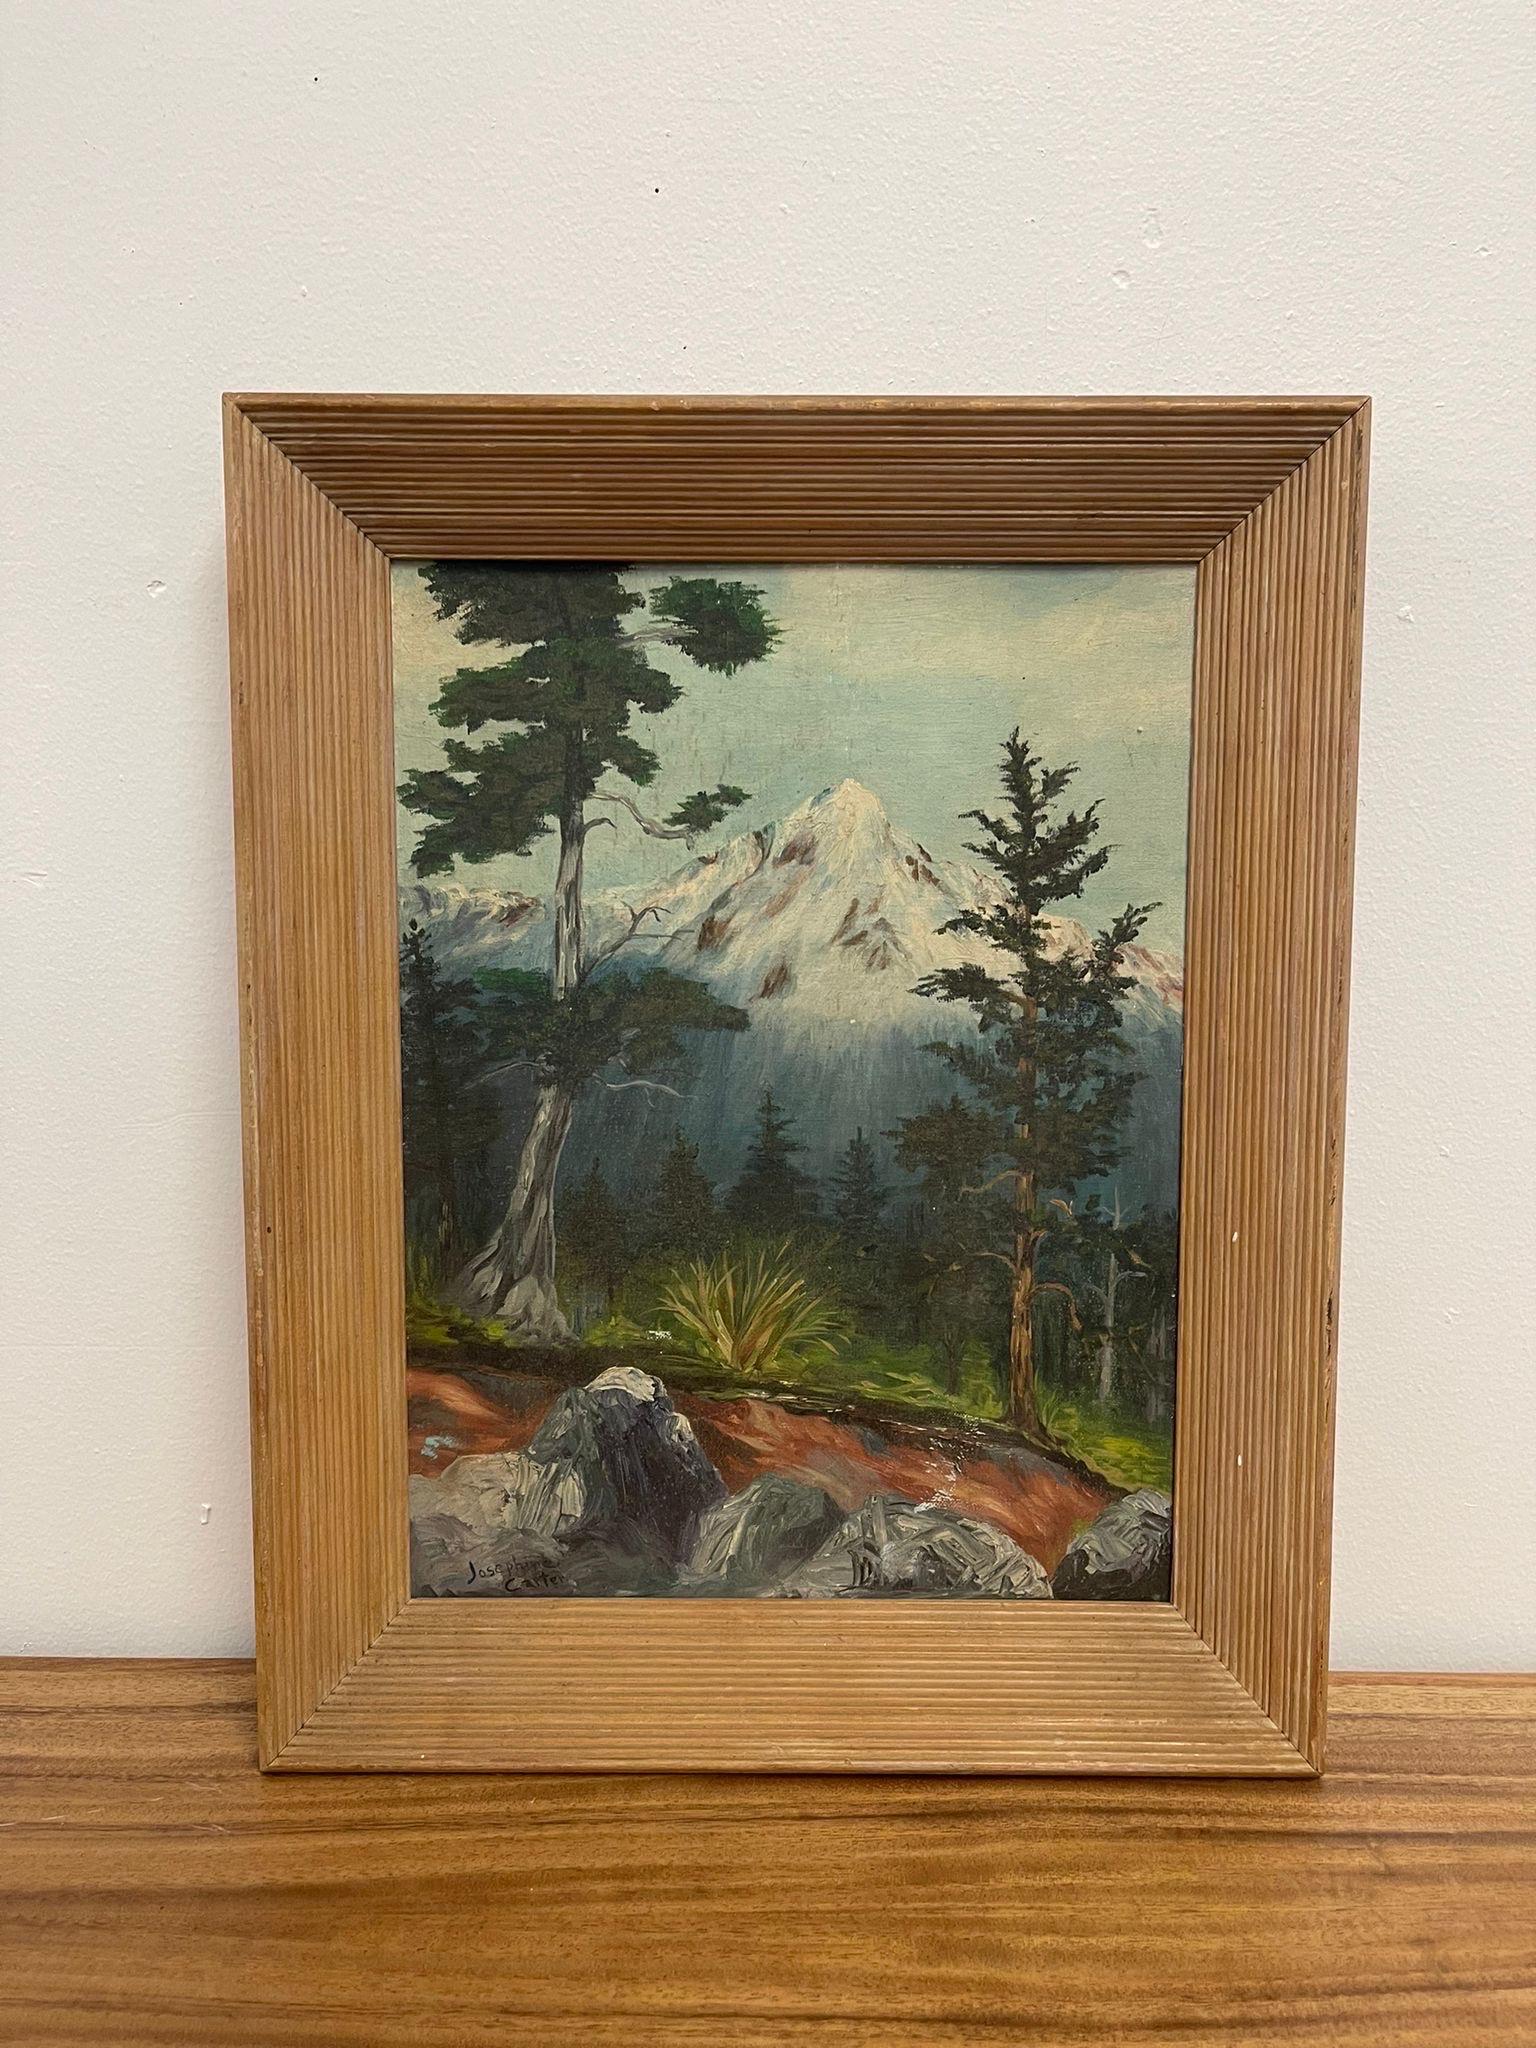 Wood Framed Vintage Painting of Mountain in the Forest. Possibly Acrylic on Canvas. Unique Pencil Reed Style Frame. Signed in the Lower Corner as Pictured. Vintage Condition Consistent with Age as Pictured.

Dimensions. 10 W ; 1 D ; 15 H